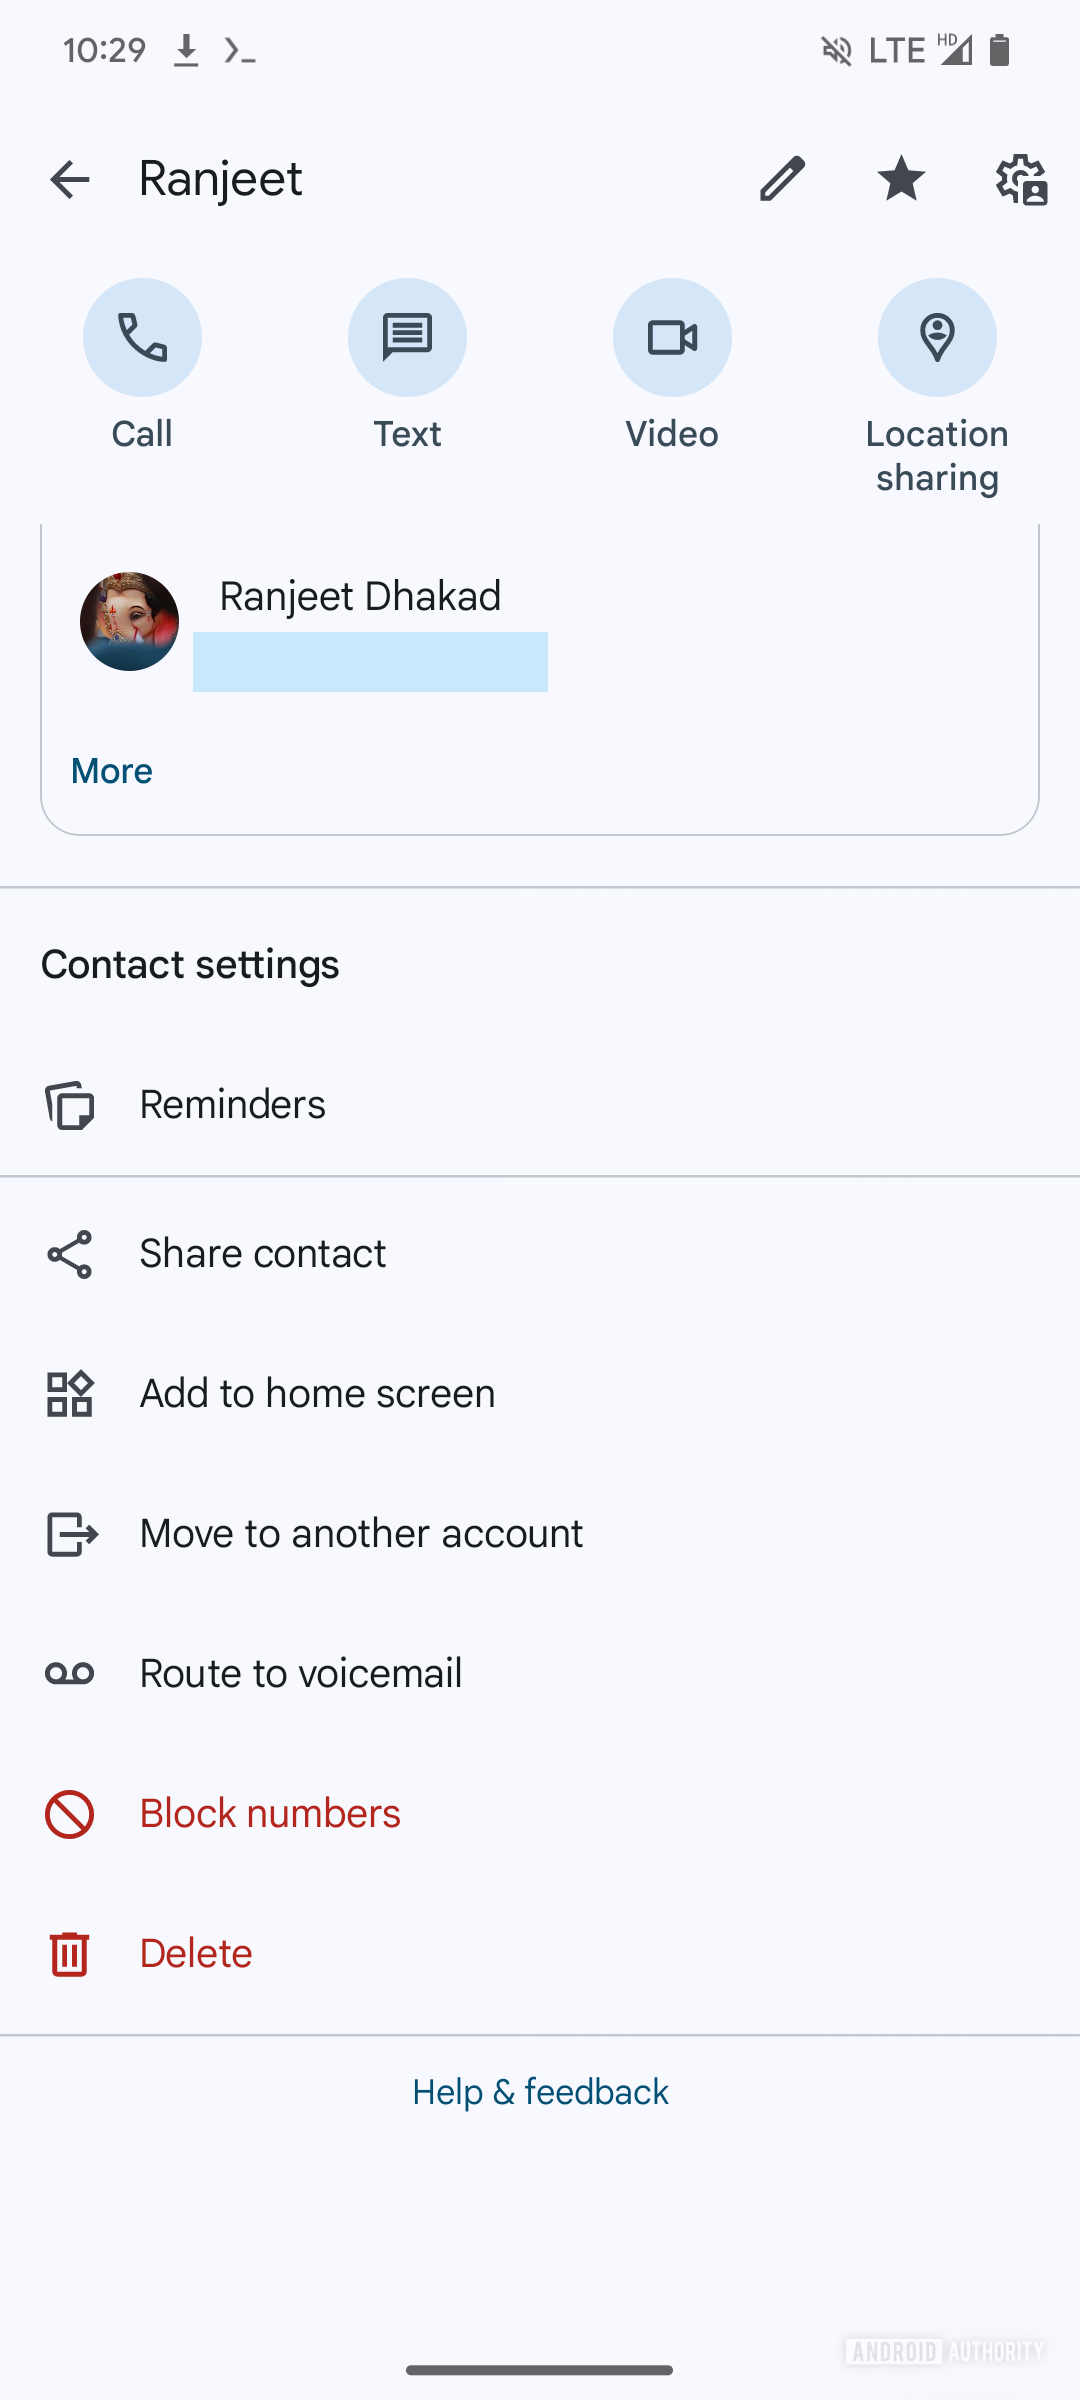 Screenshot of the Google Contacts app showing the upcoming UI change for the contact details page.